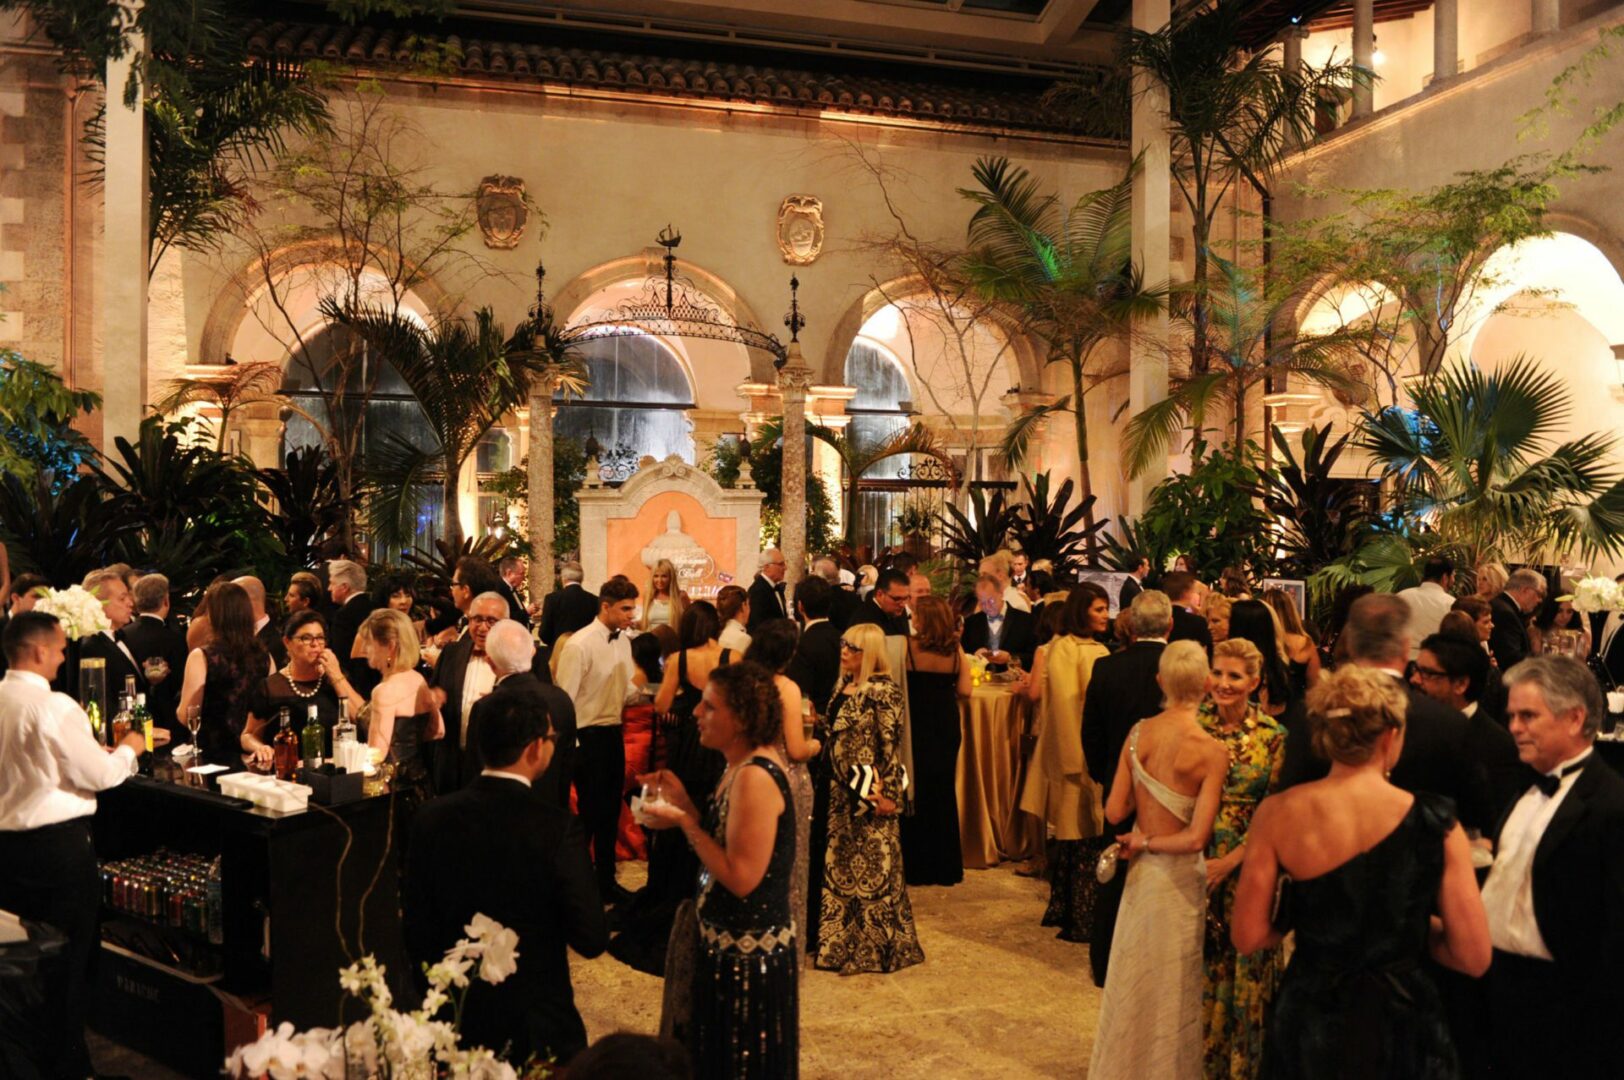 Guests mingle during the cocktail portion of the Vizcaya Ball. Photo by World Red Eye.